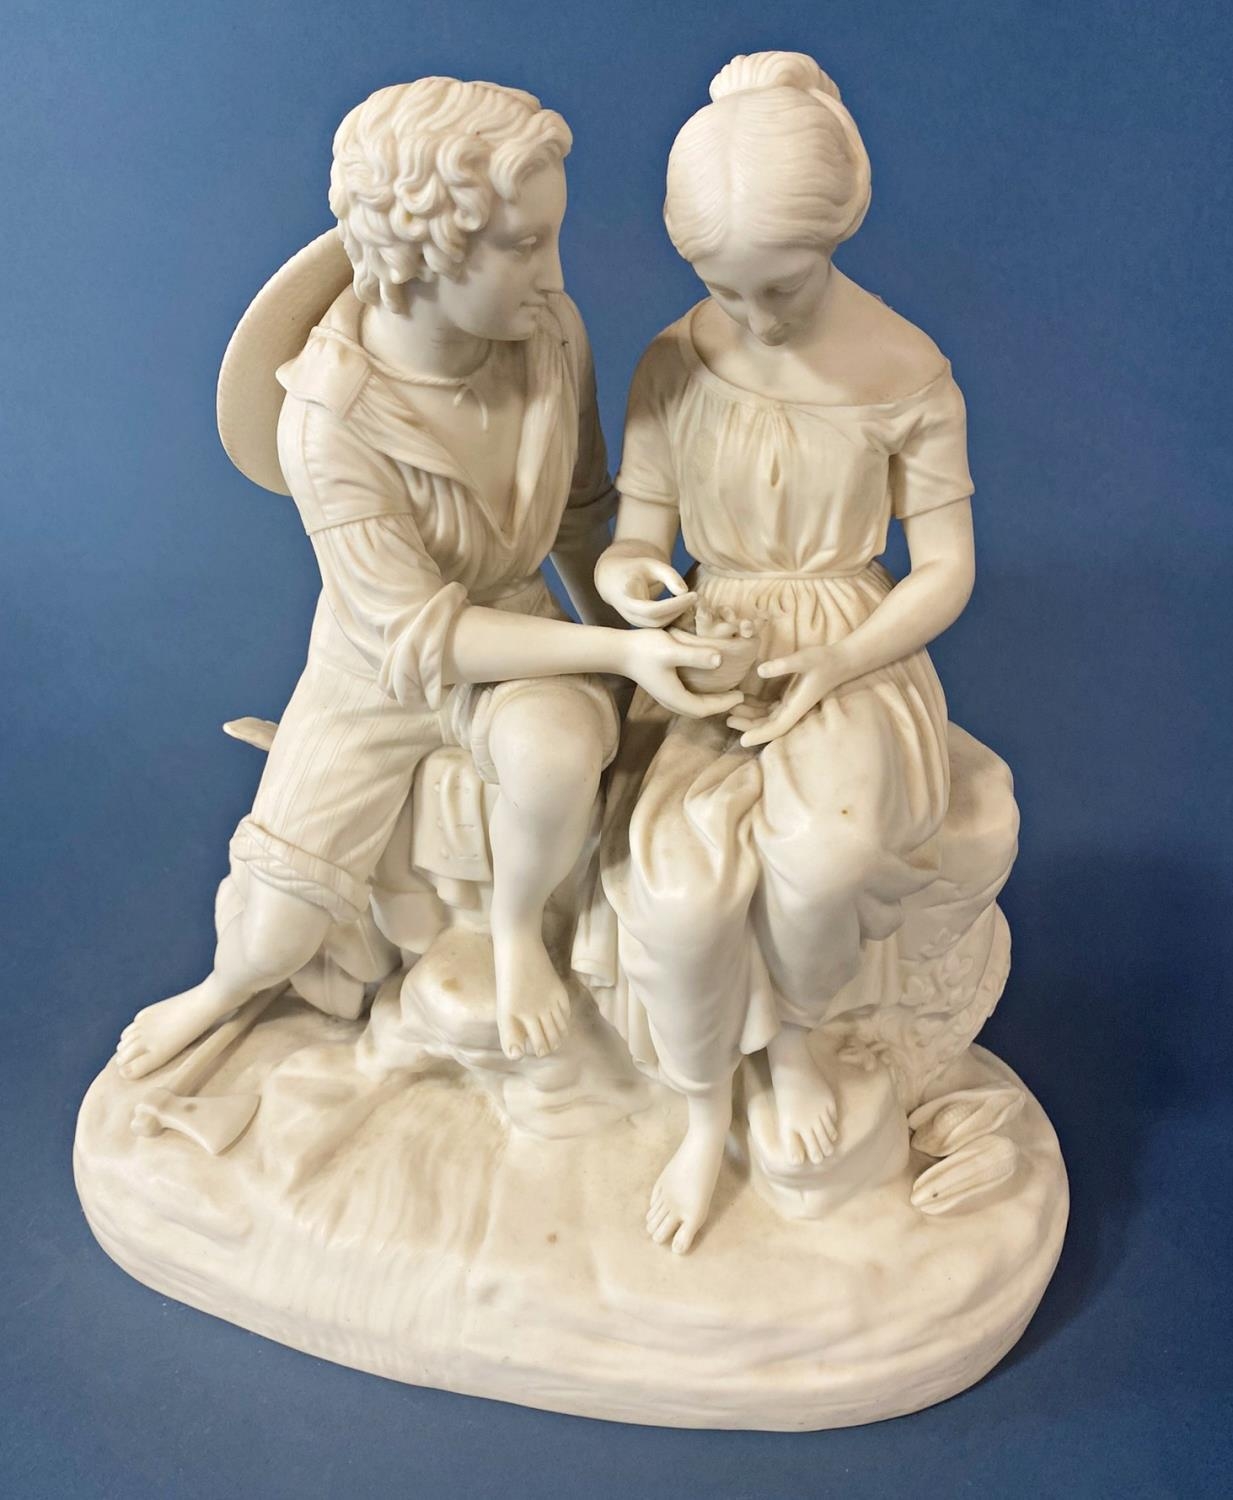 A 19th century Copeland Parian figure of Paul and Virginia, modelled by C Cumberworth